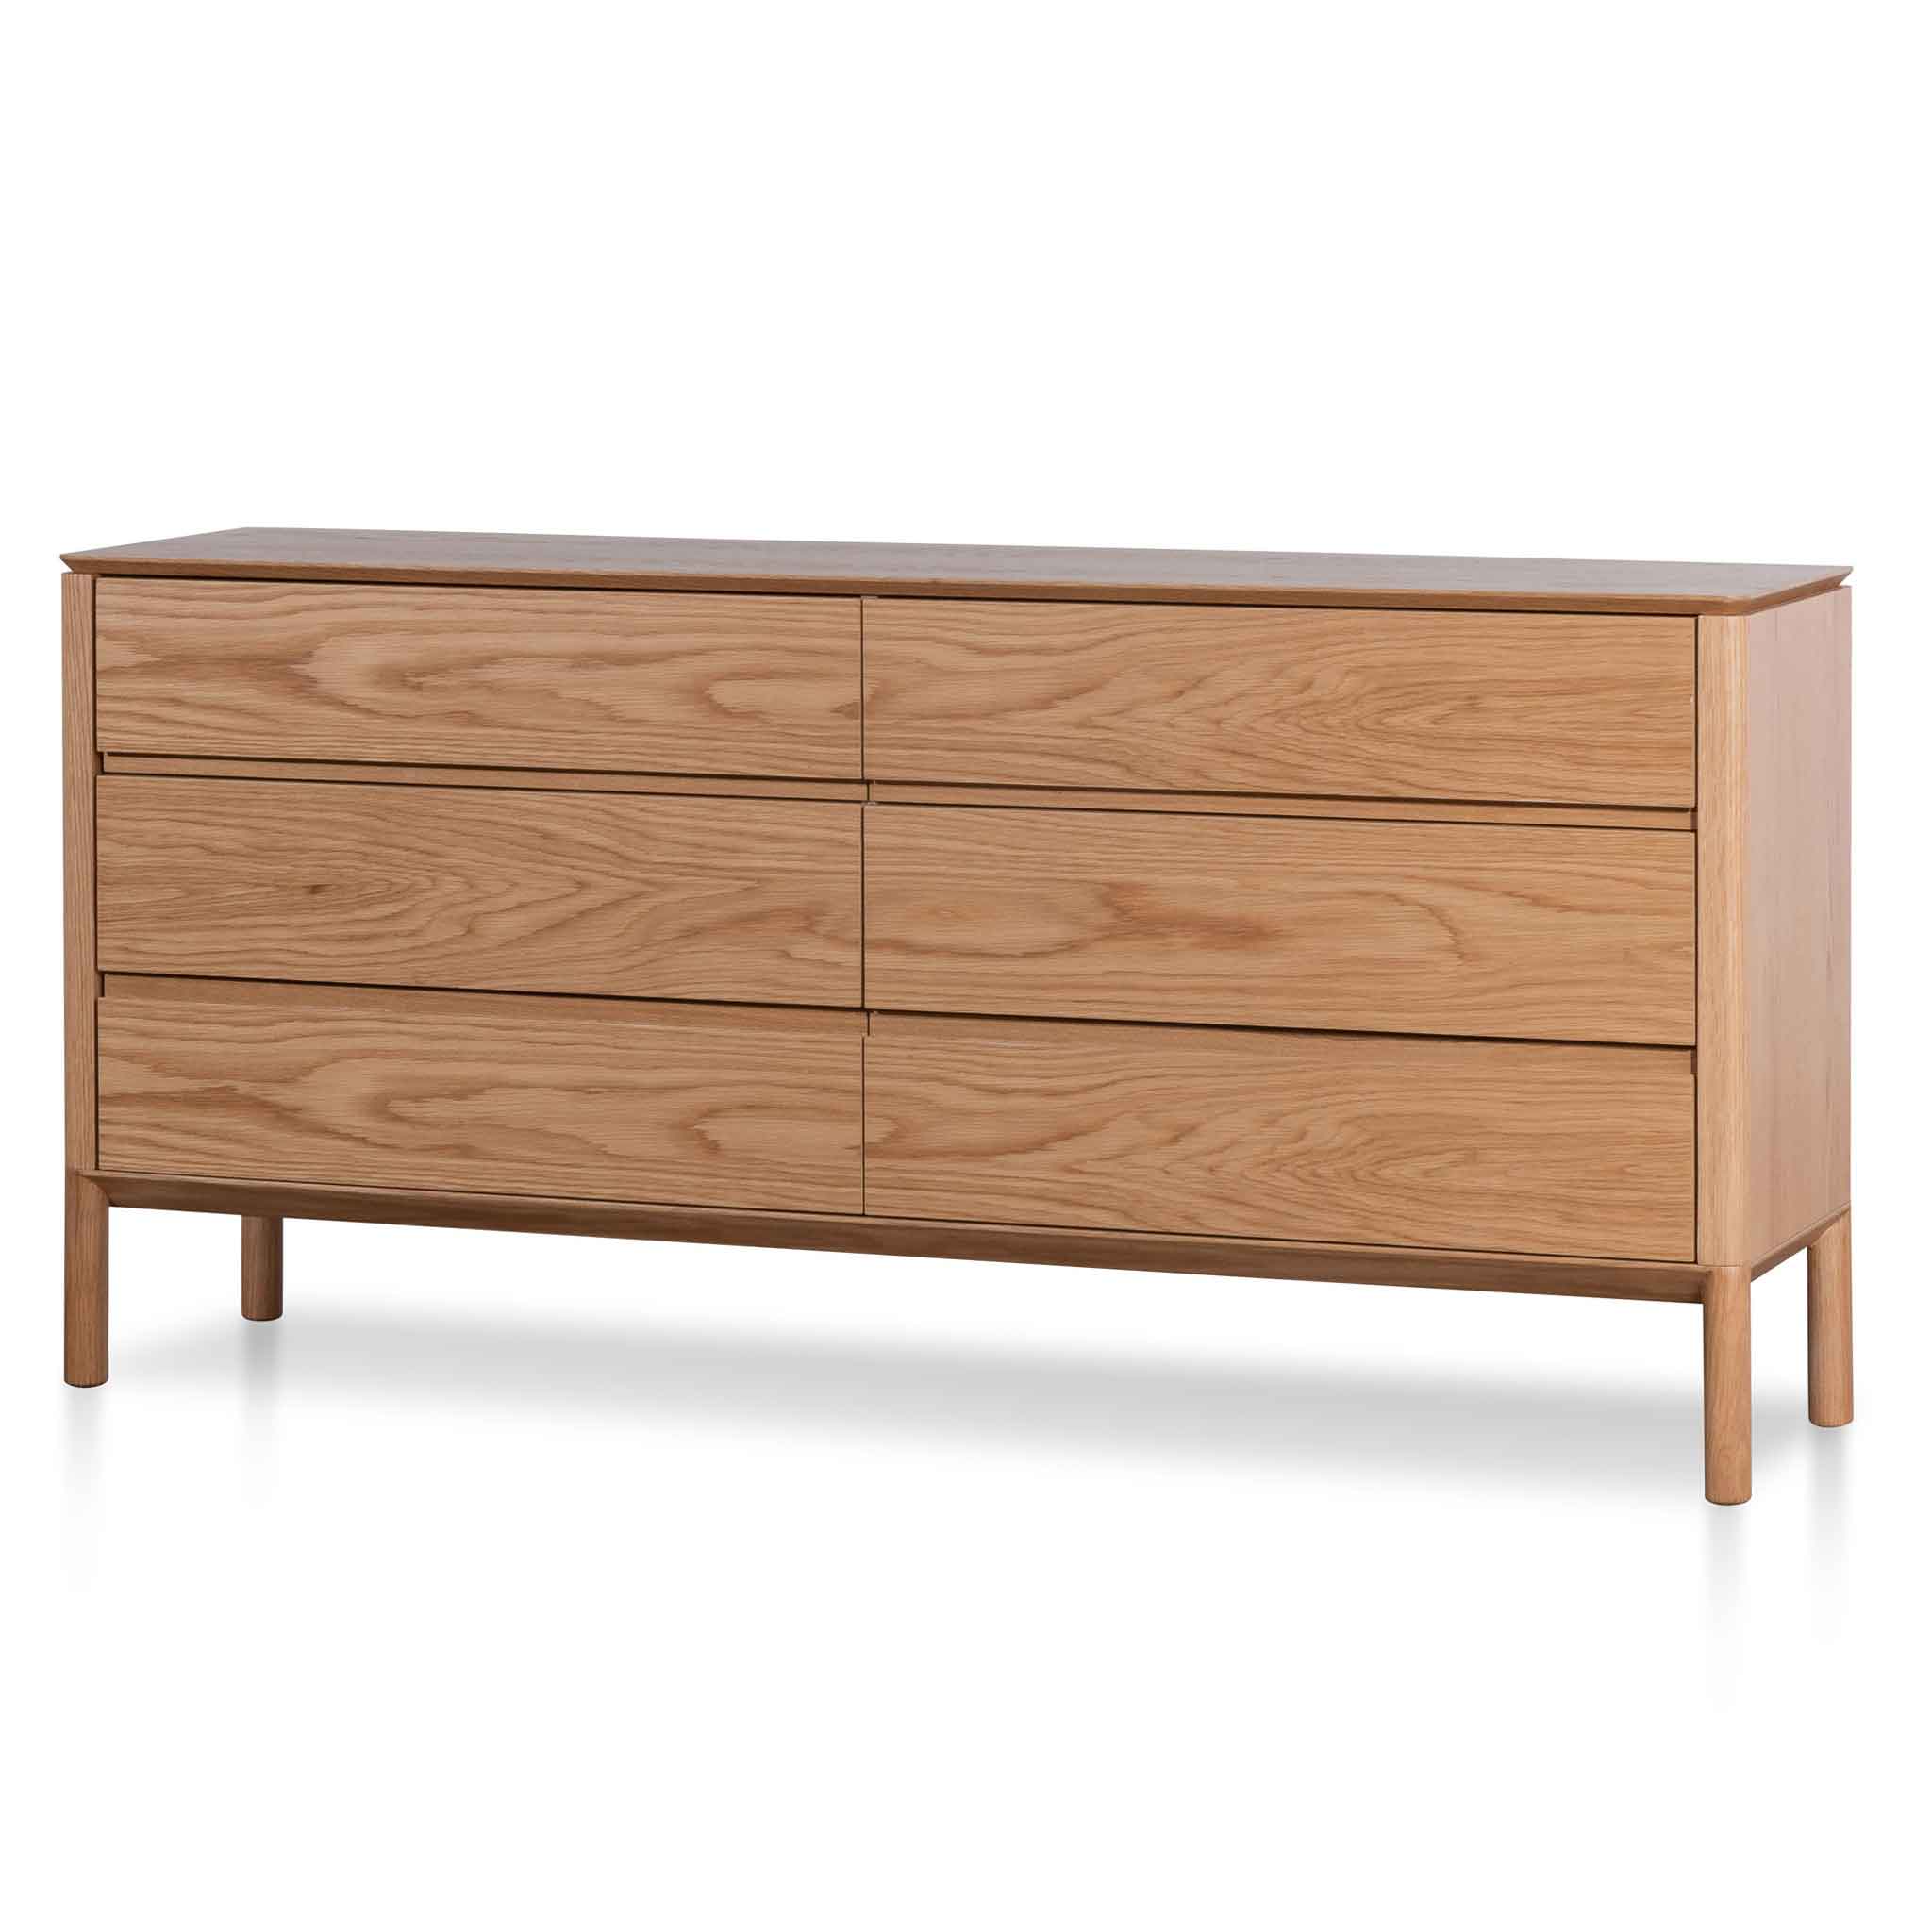 Penelope 6 Drawers Wooden Chest - Natural